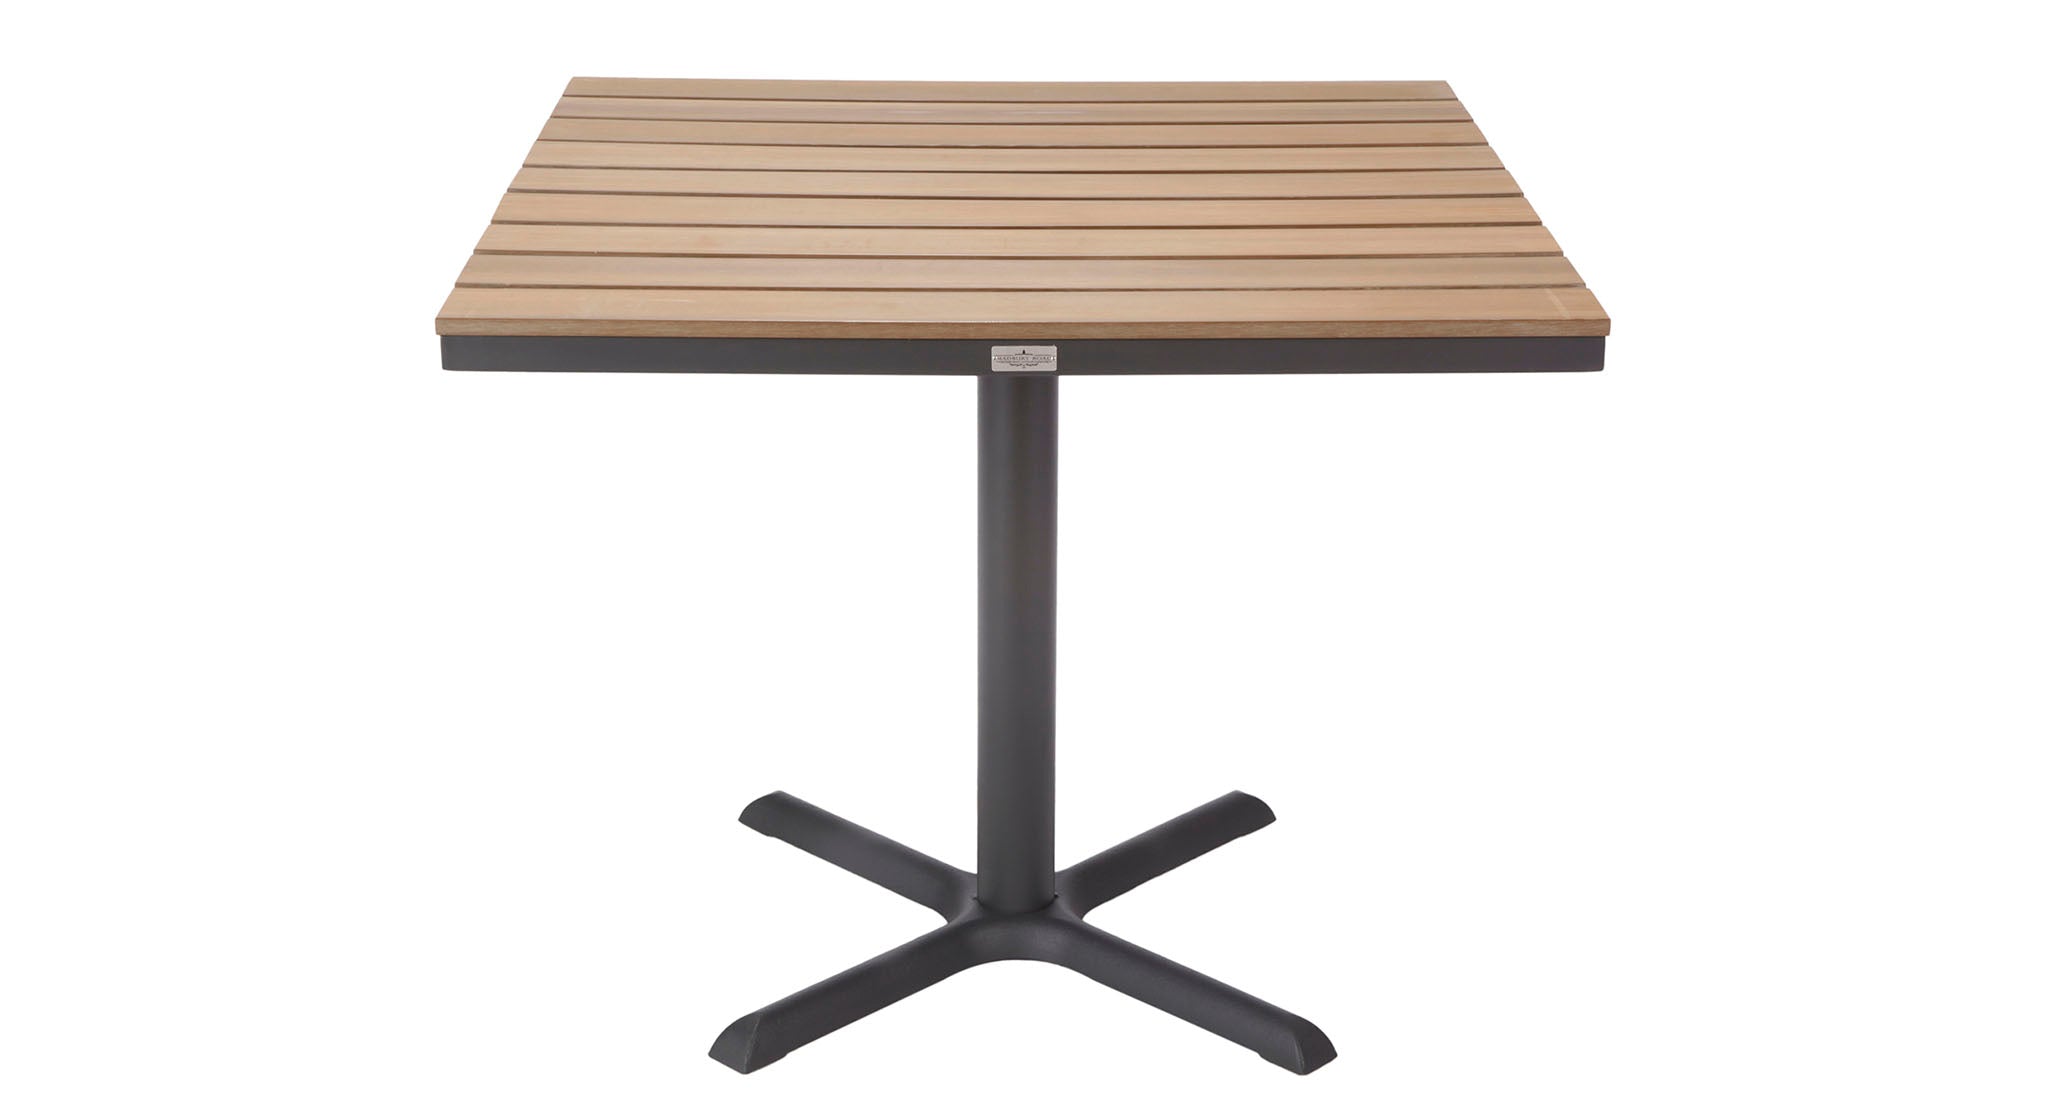 Asher outdoor 4 top dining table 